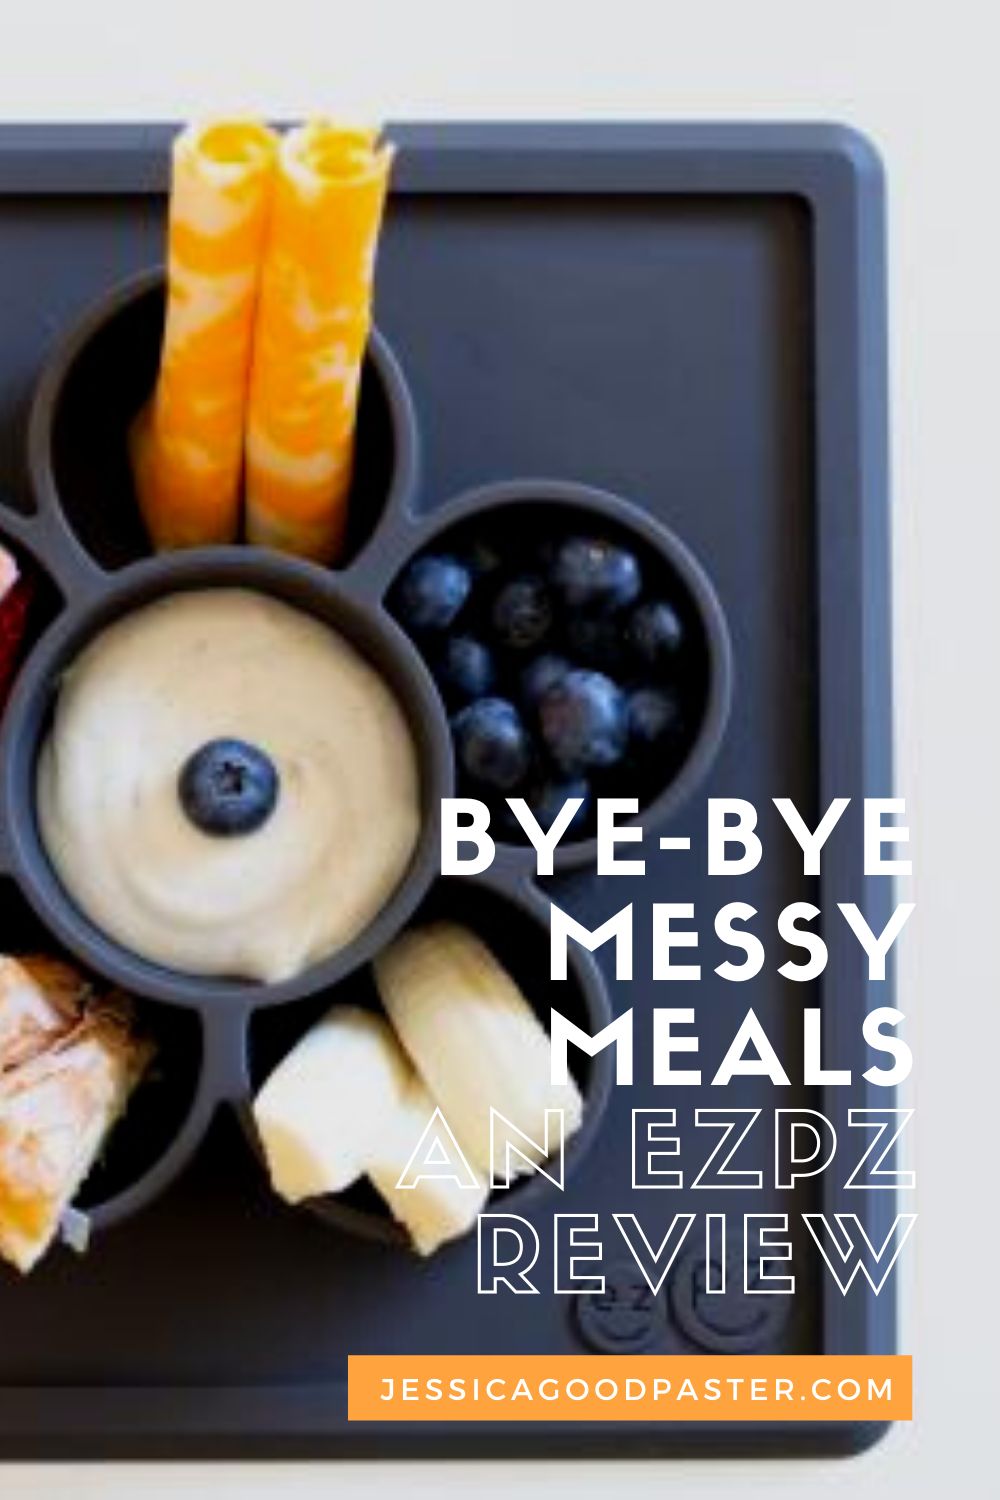 Bye-Bye Messy Meals! An ezpz Review | As a mom and long-time user of ezpz mats and bowls, I review this baby registry must-have for parents of infants, toddlers, and preschoolers. Make mealtime less messy and easier with suctioned silicone plates, bowls, cups, and utensils designed for feeding independence. Makes a great baby shower gift! #ezpz #selffeeding #babygifts #review #baby #feeding #toddlers